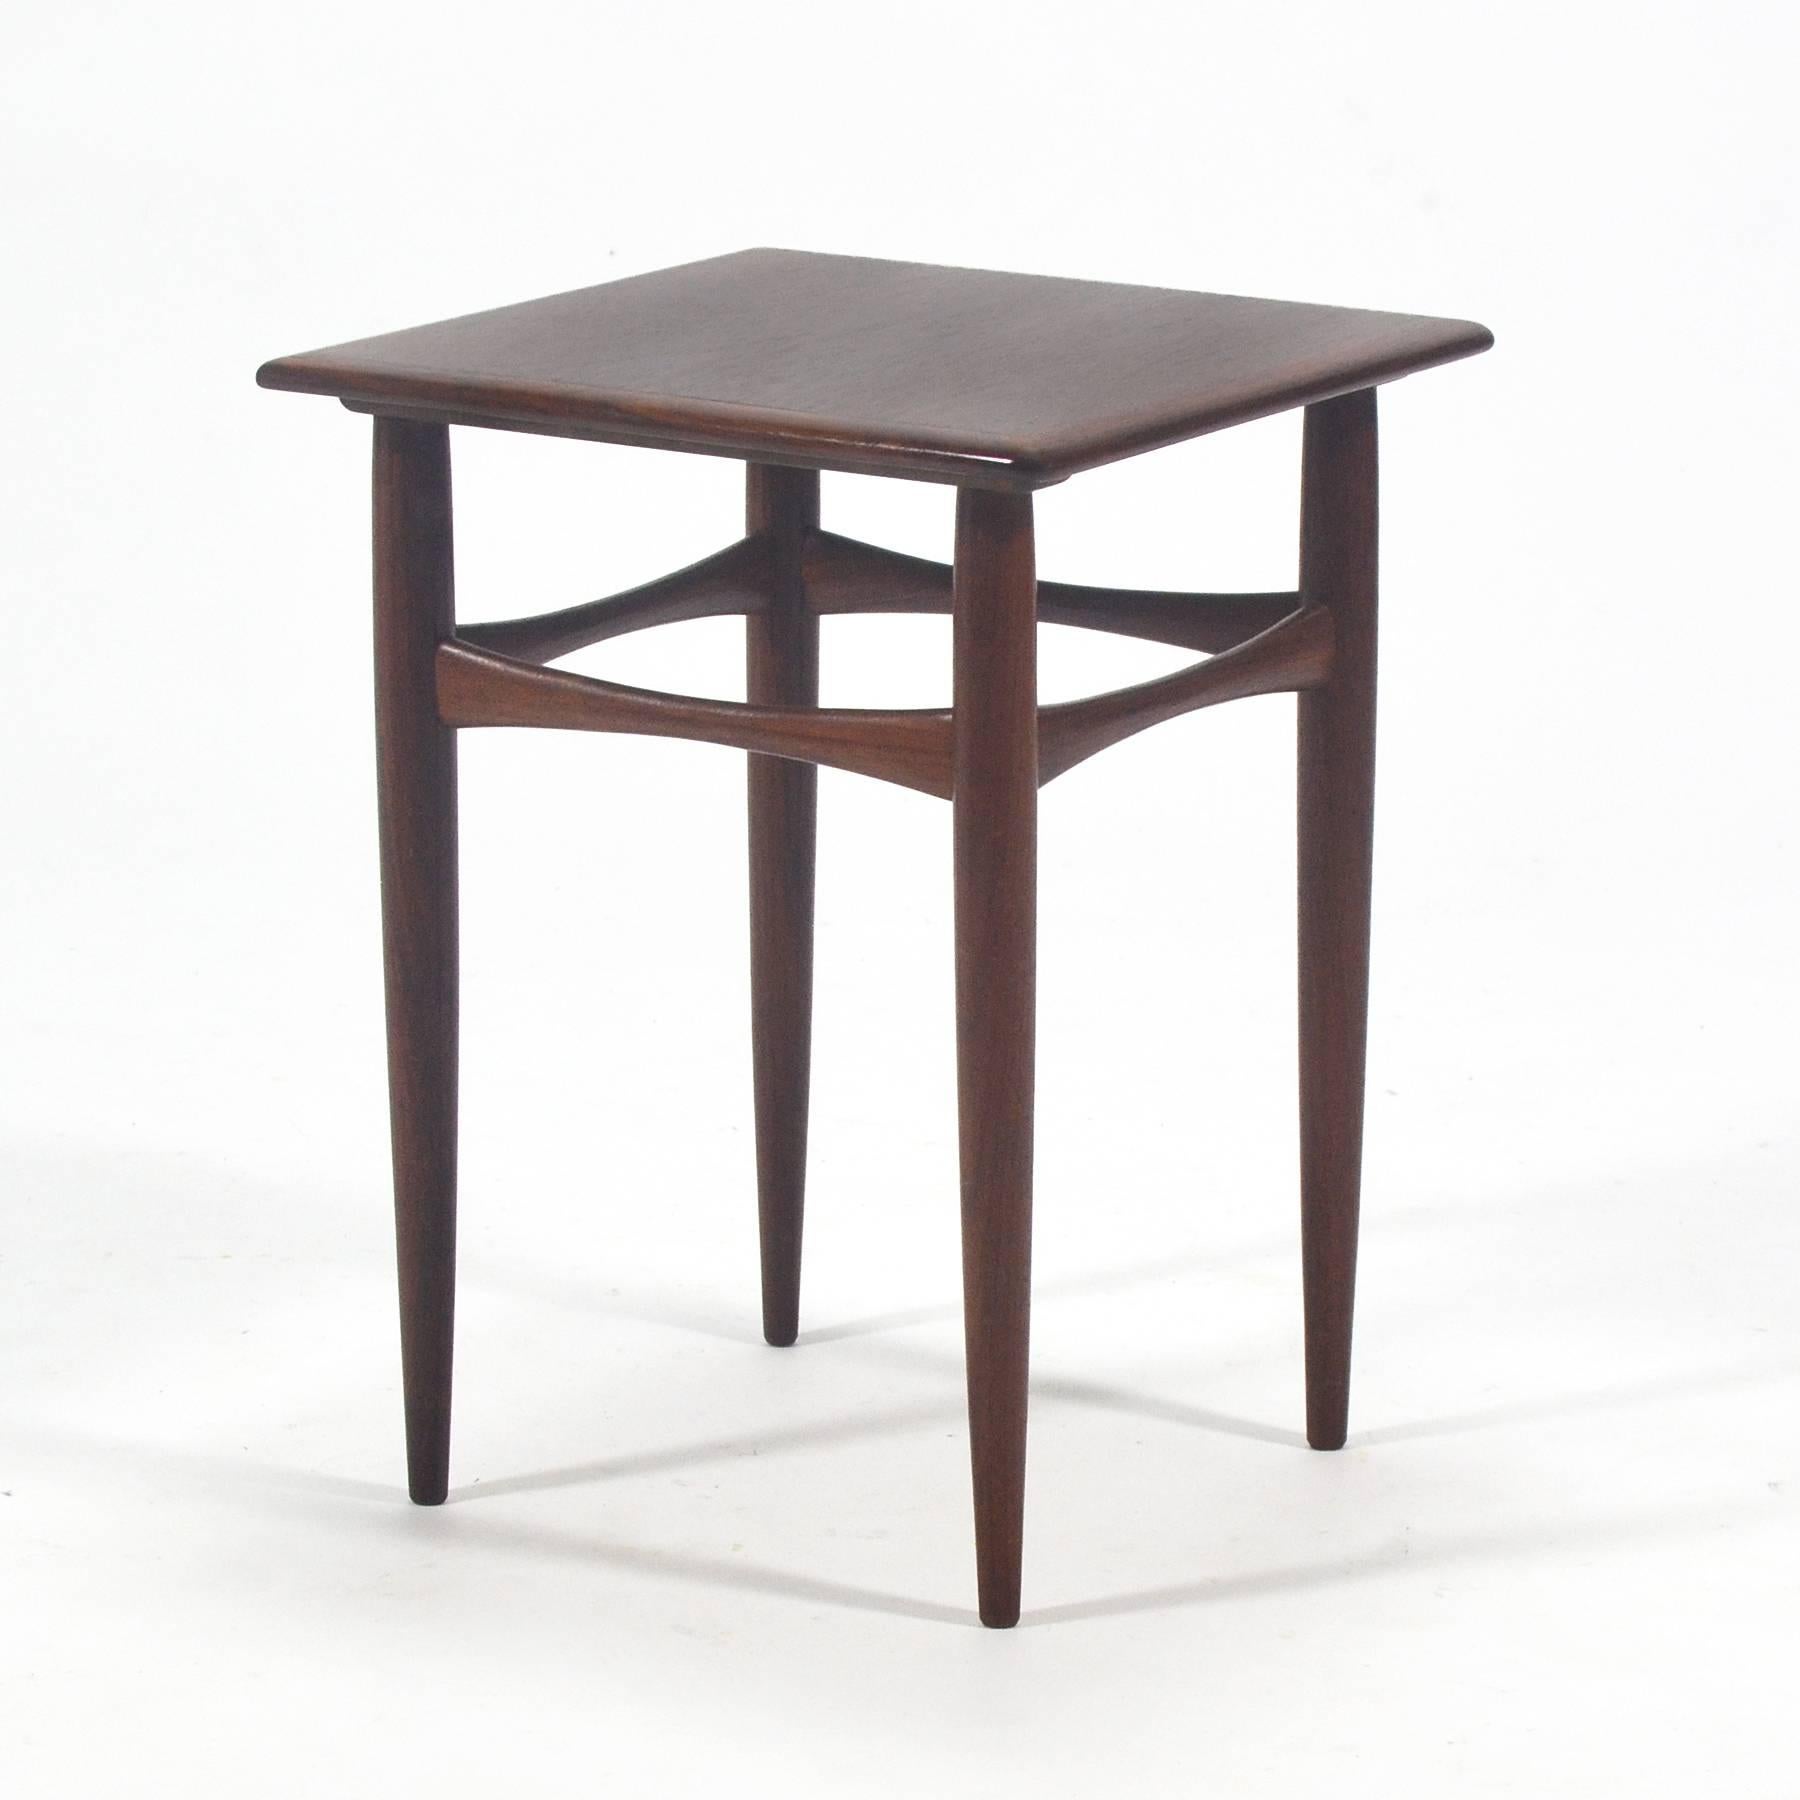 This delightful diminutive side table by Arne Hovmand-Olsen is crafted of rich rosewood and has subtle, beautiful lines which are distinctively Scandinavian.